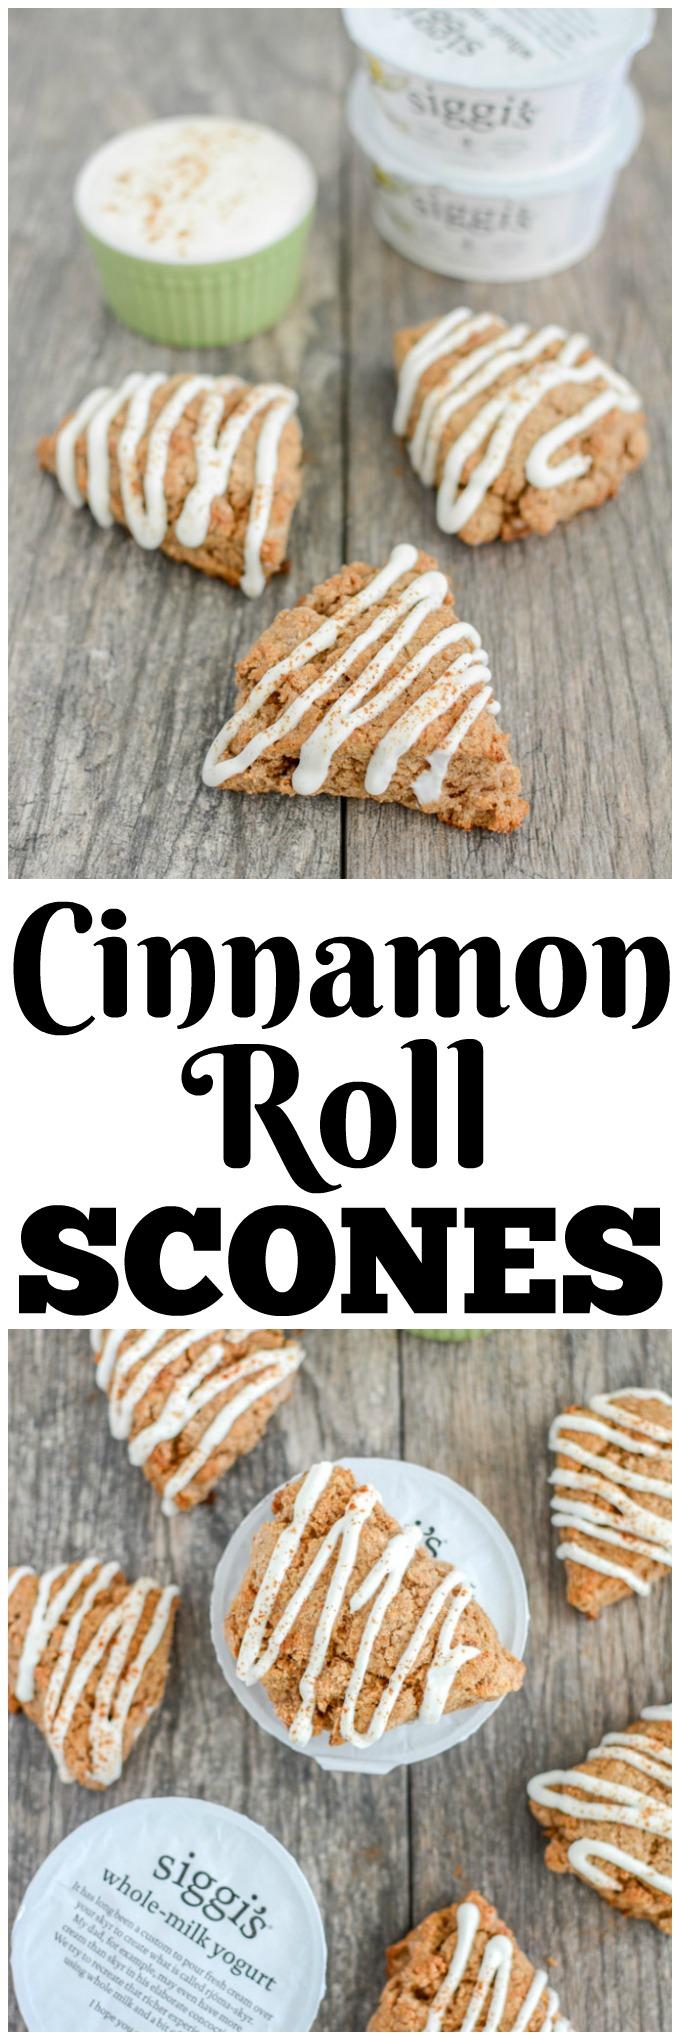 These Small Batch Cinnamon Roll Scones are perfect for a weekend breakfast or brunch. They're bursting with cinnamon flavor and topped with a delicious yogurt drizzle. 